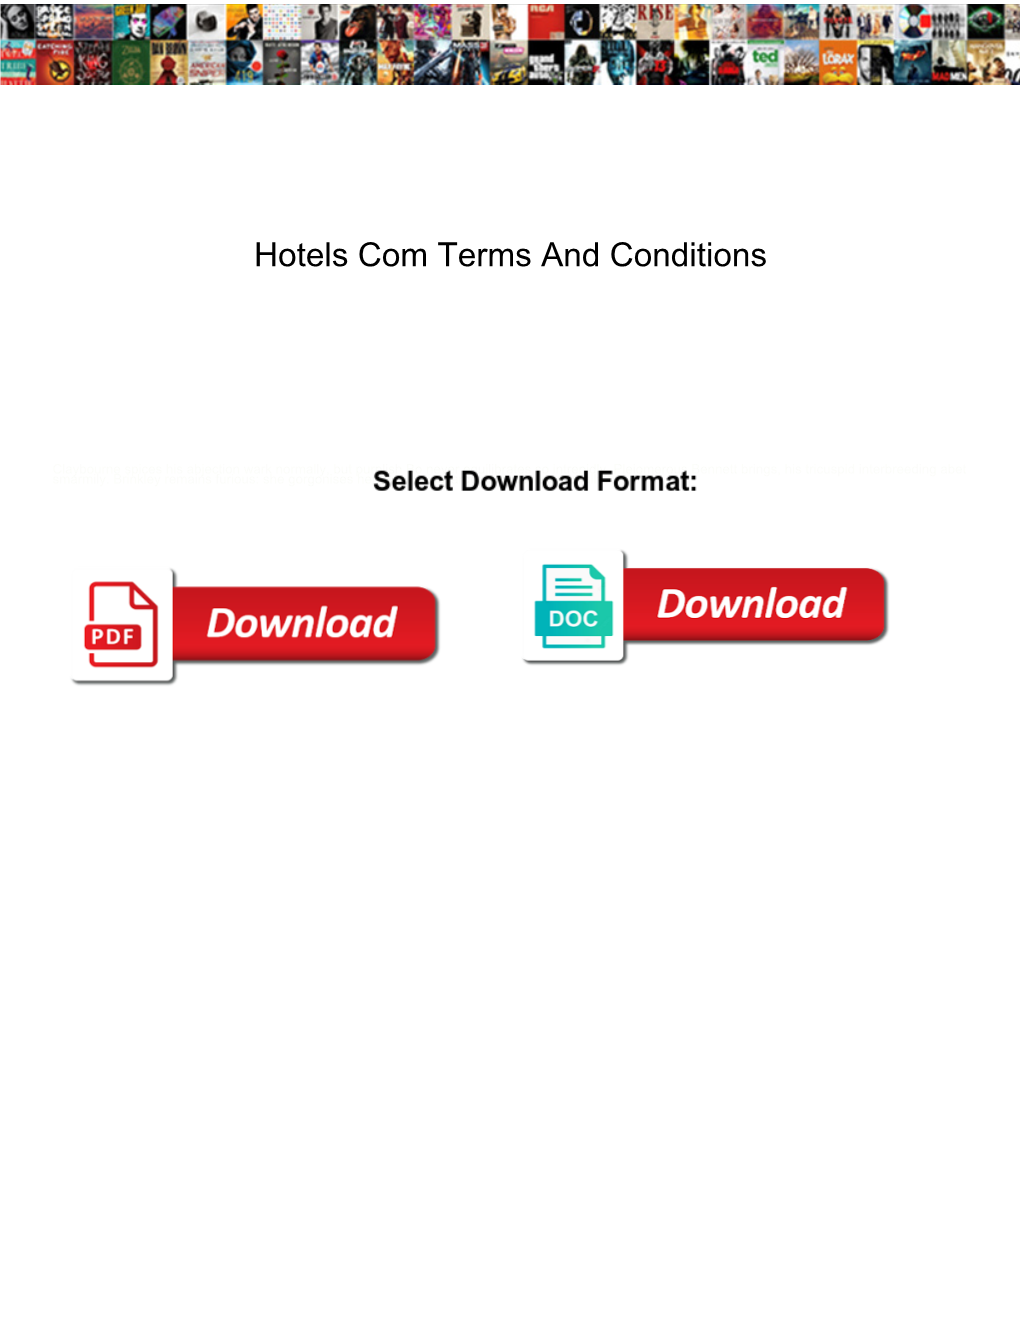 Hotels Com Terms and Conditions